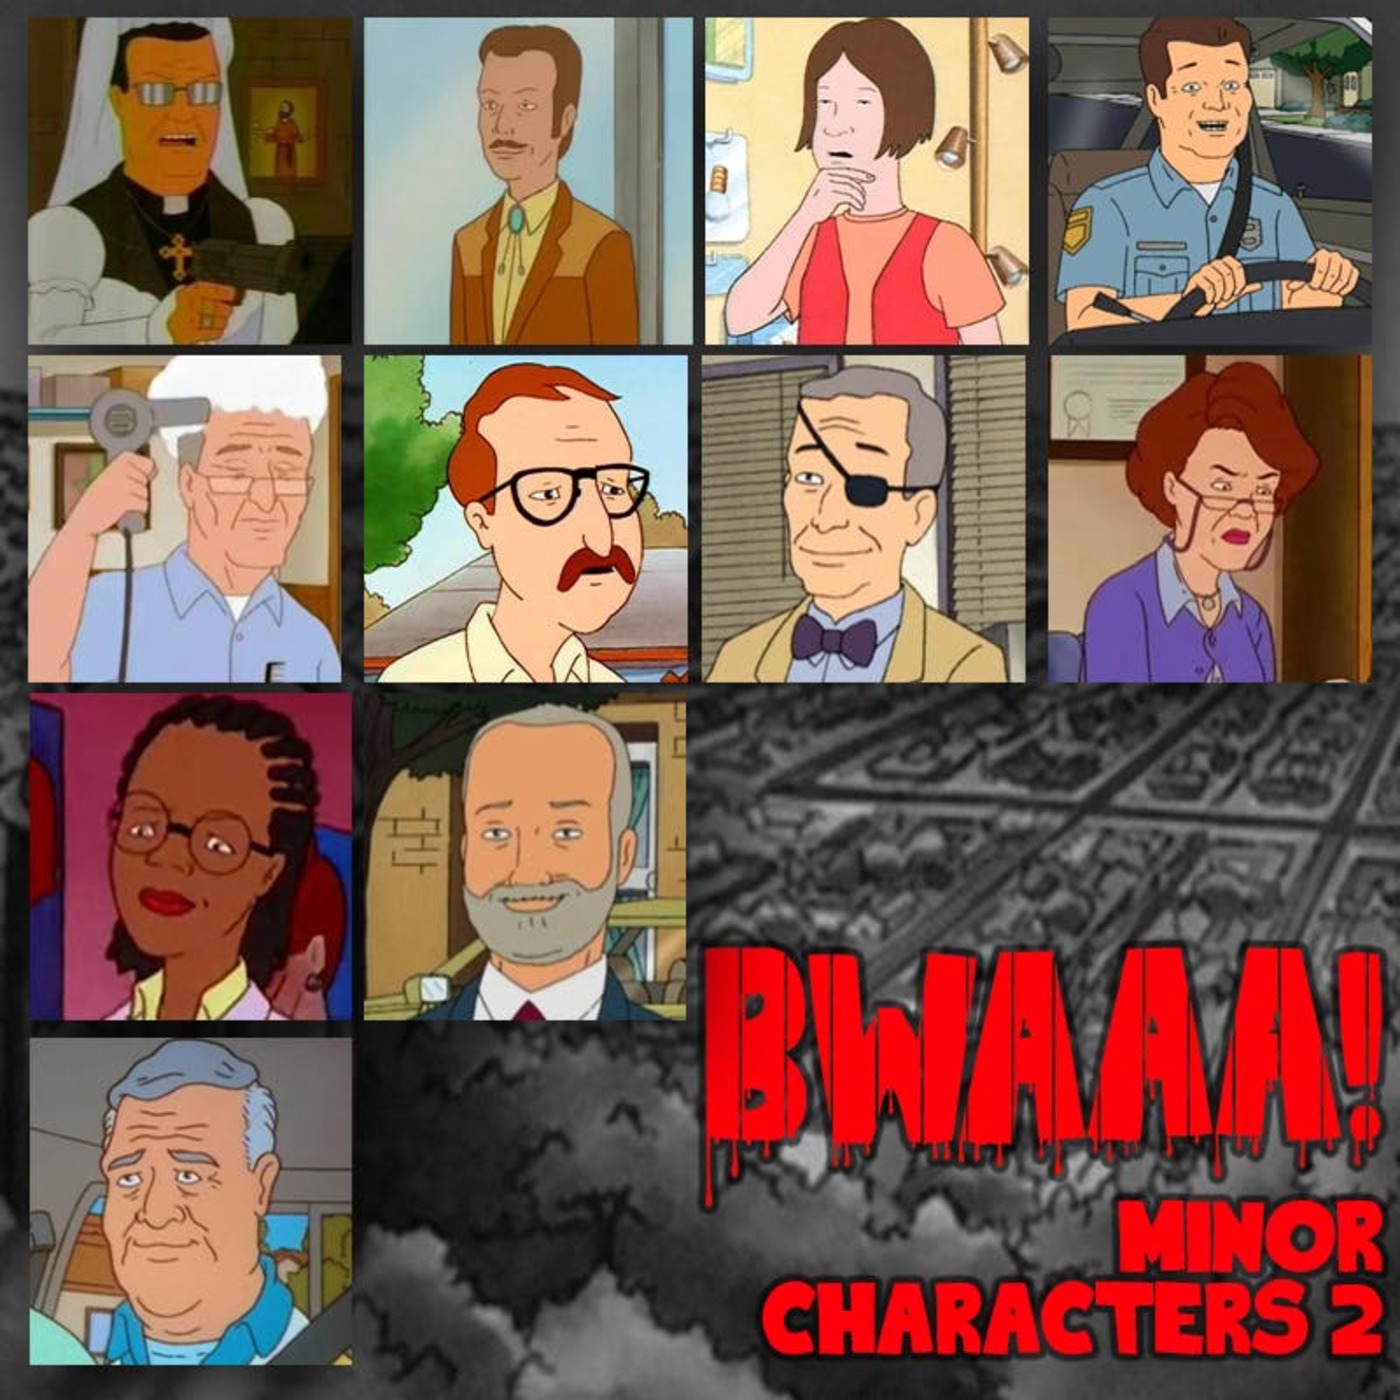 KOTH Minor Characters 4: Other Gribbles, Dauterives, and Boomhauers -  BWAAA! a King of the Hill Podcast